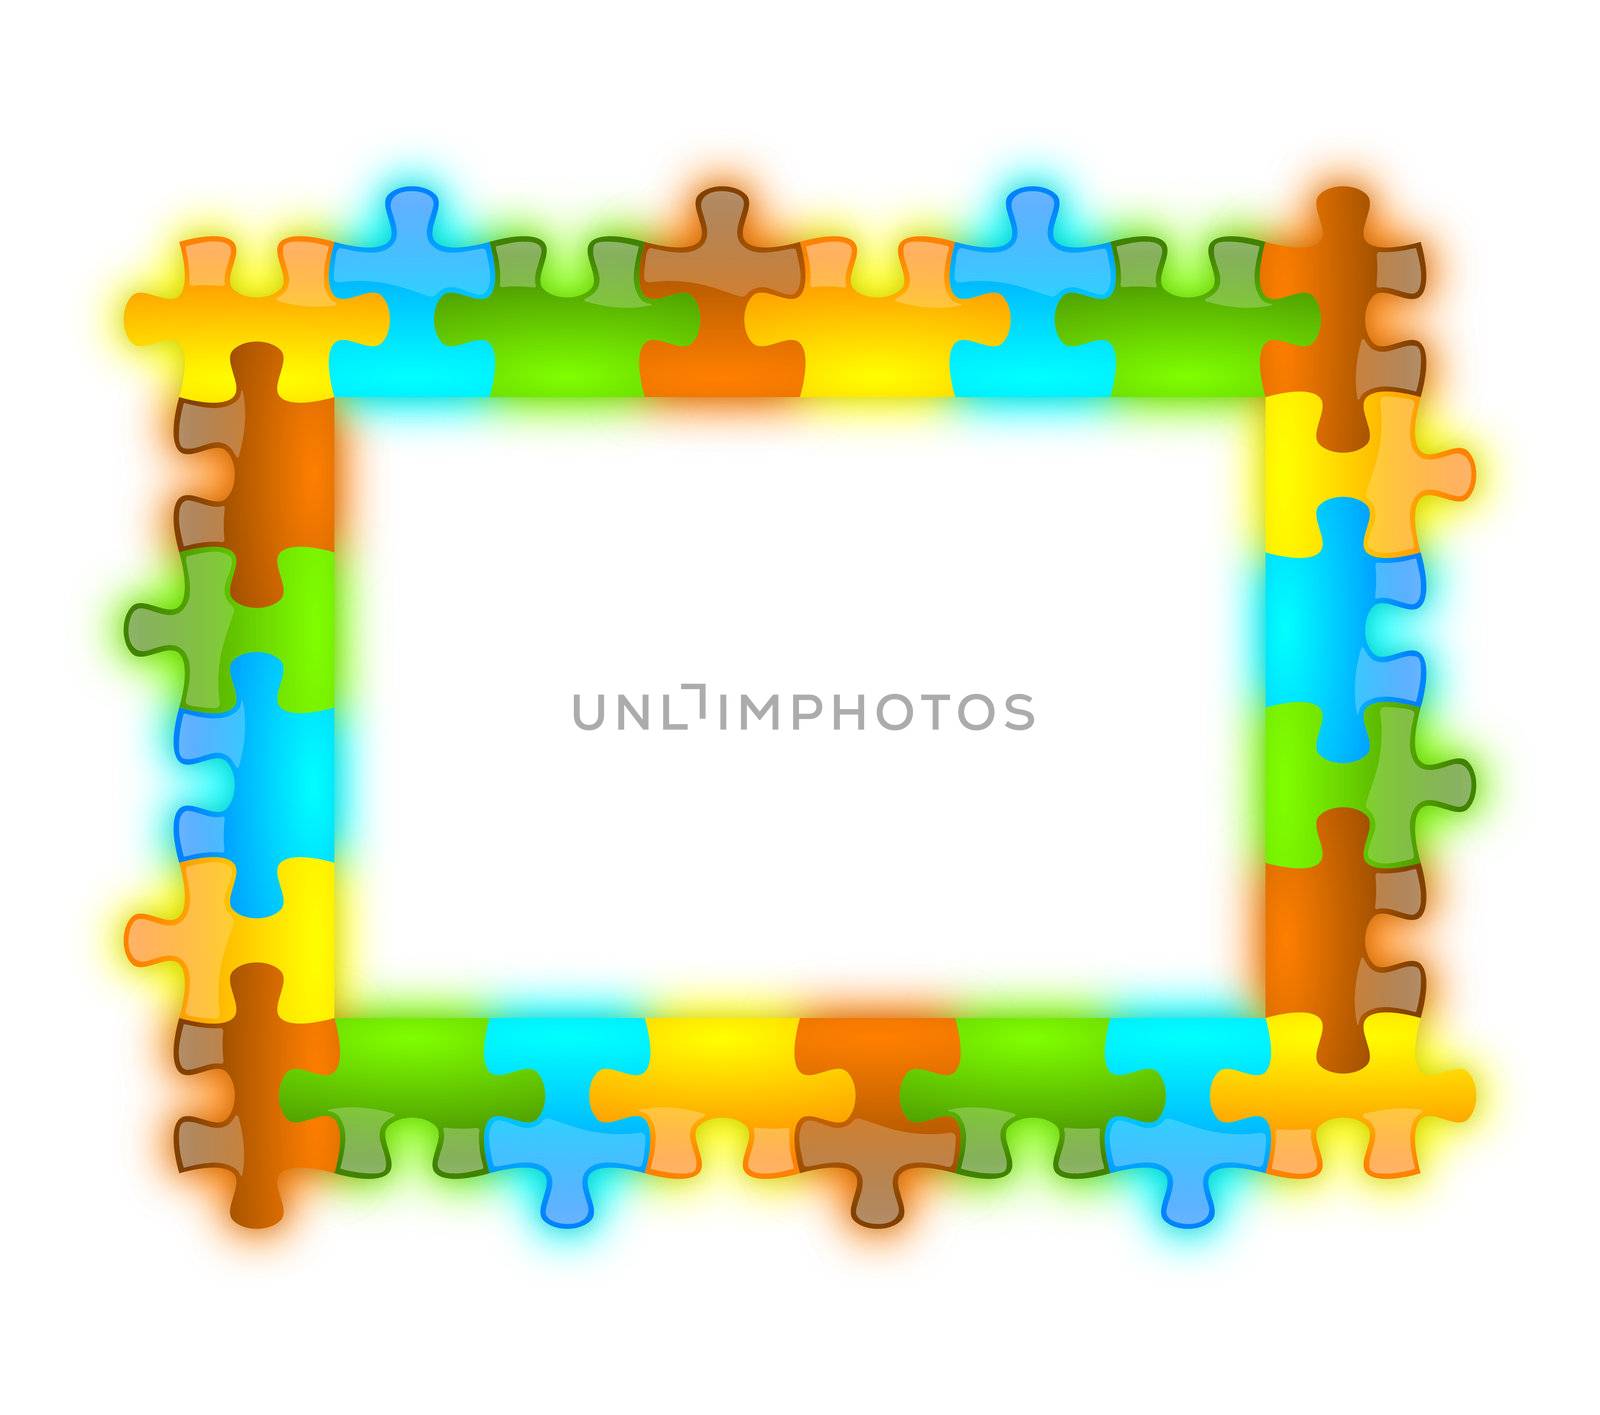 Colored, glossy, brilliant and jazzy puzzle frame 6 x 8 format with shadow